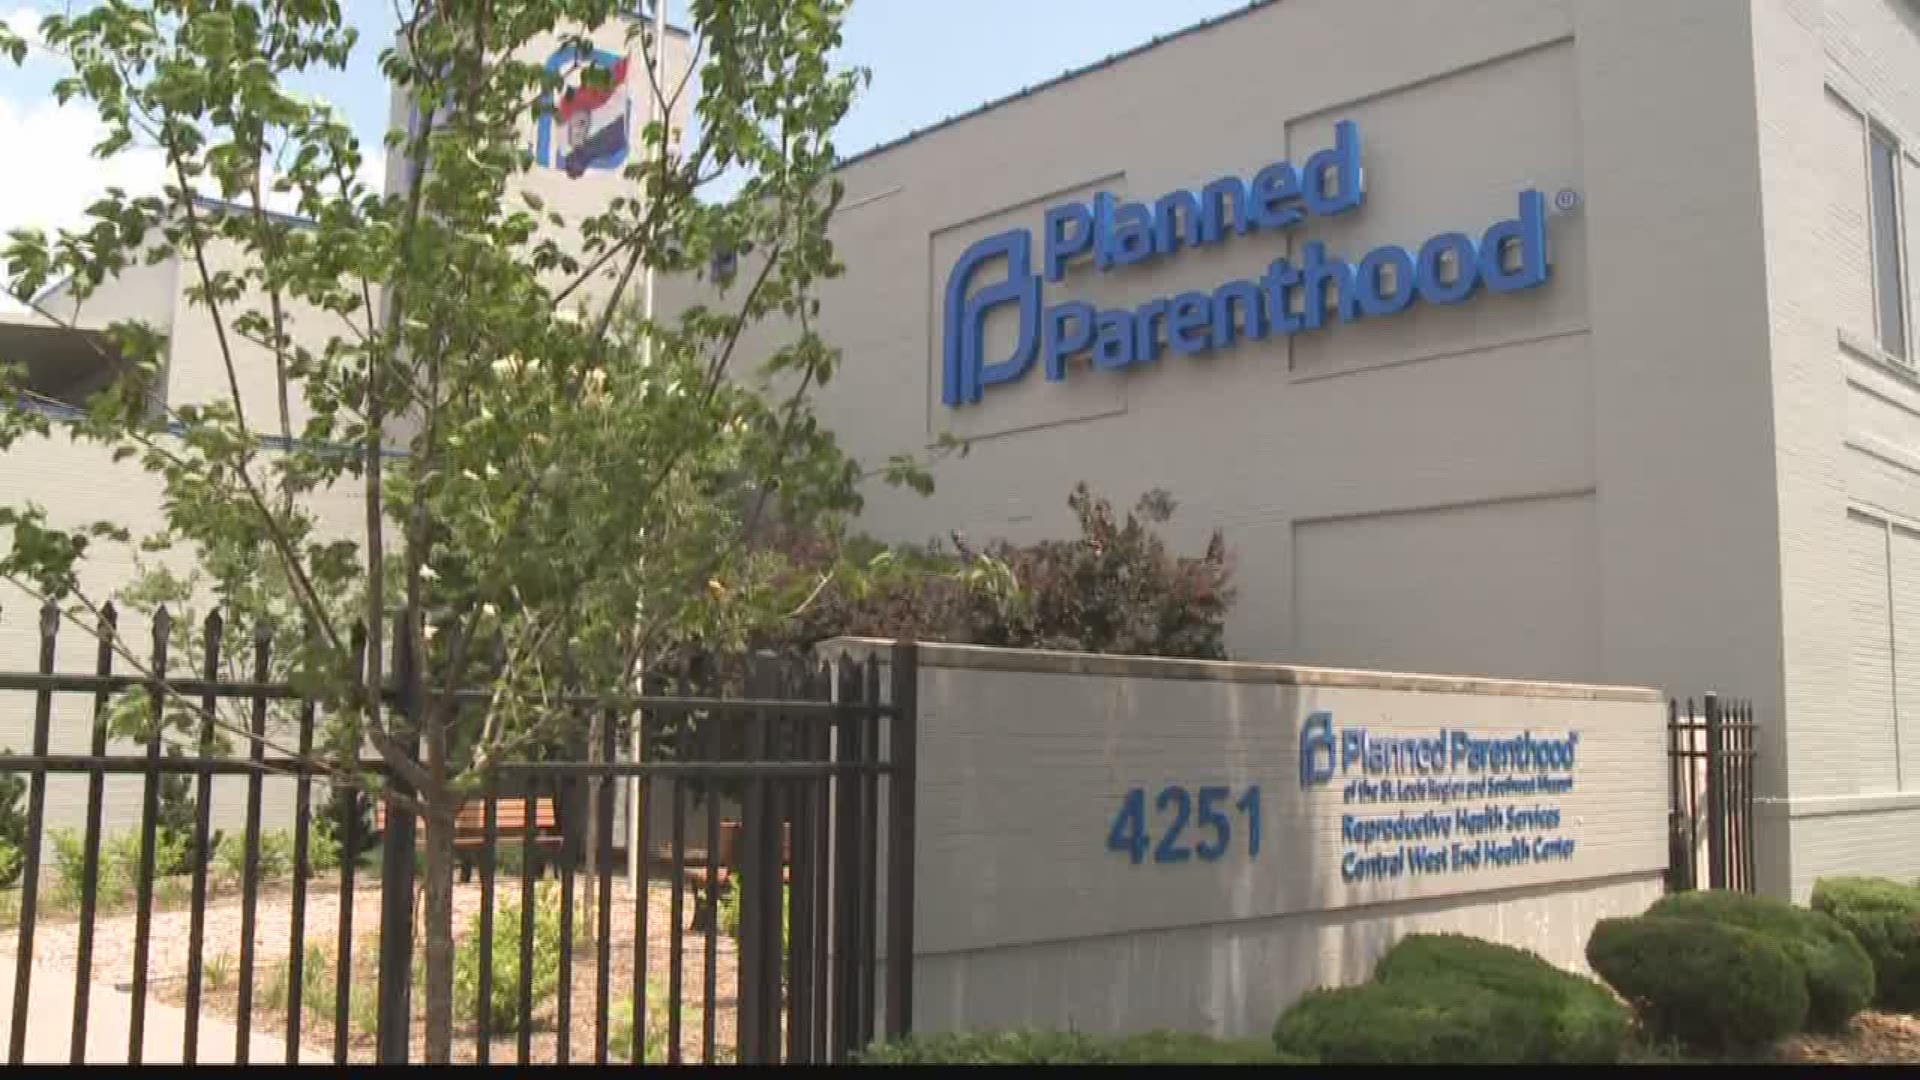 Planned Parenthood officials said in a teleconference Tuesday that the current license for the St. Louis facility expires Friday.